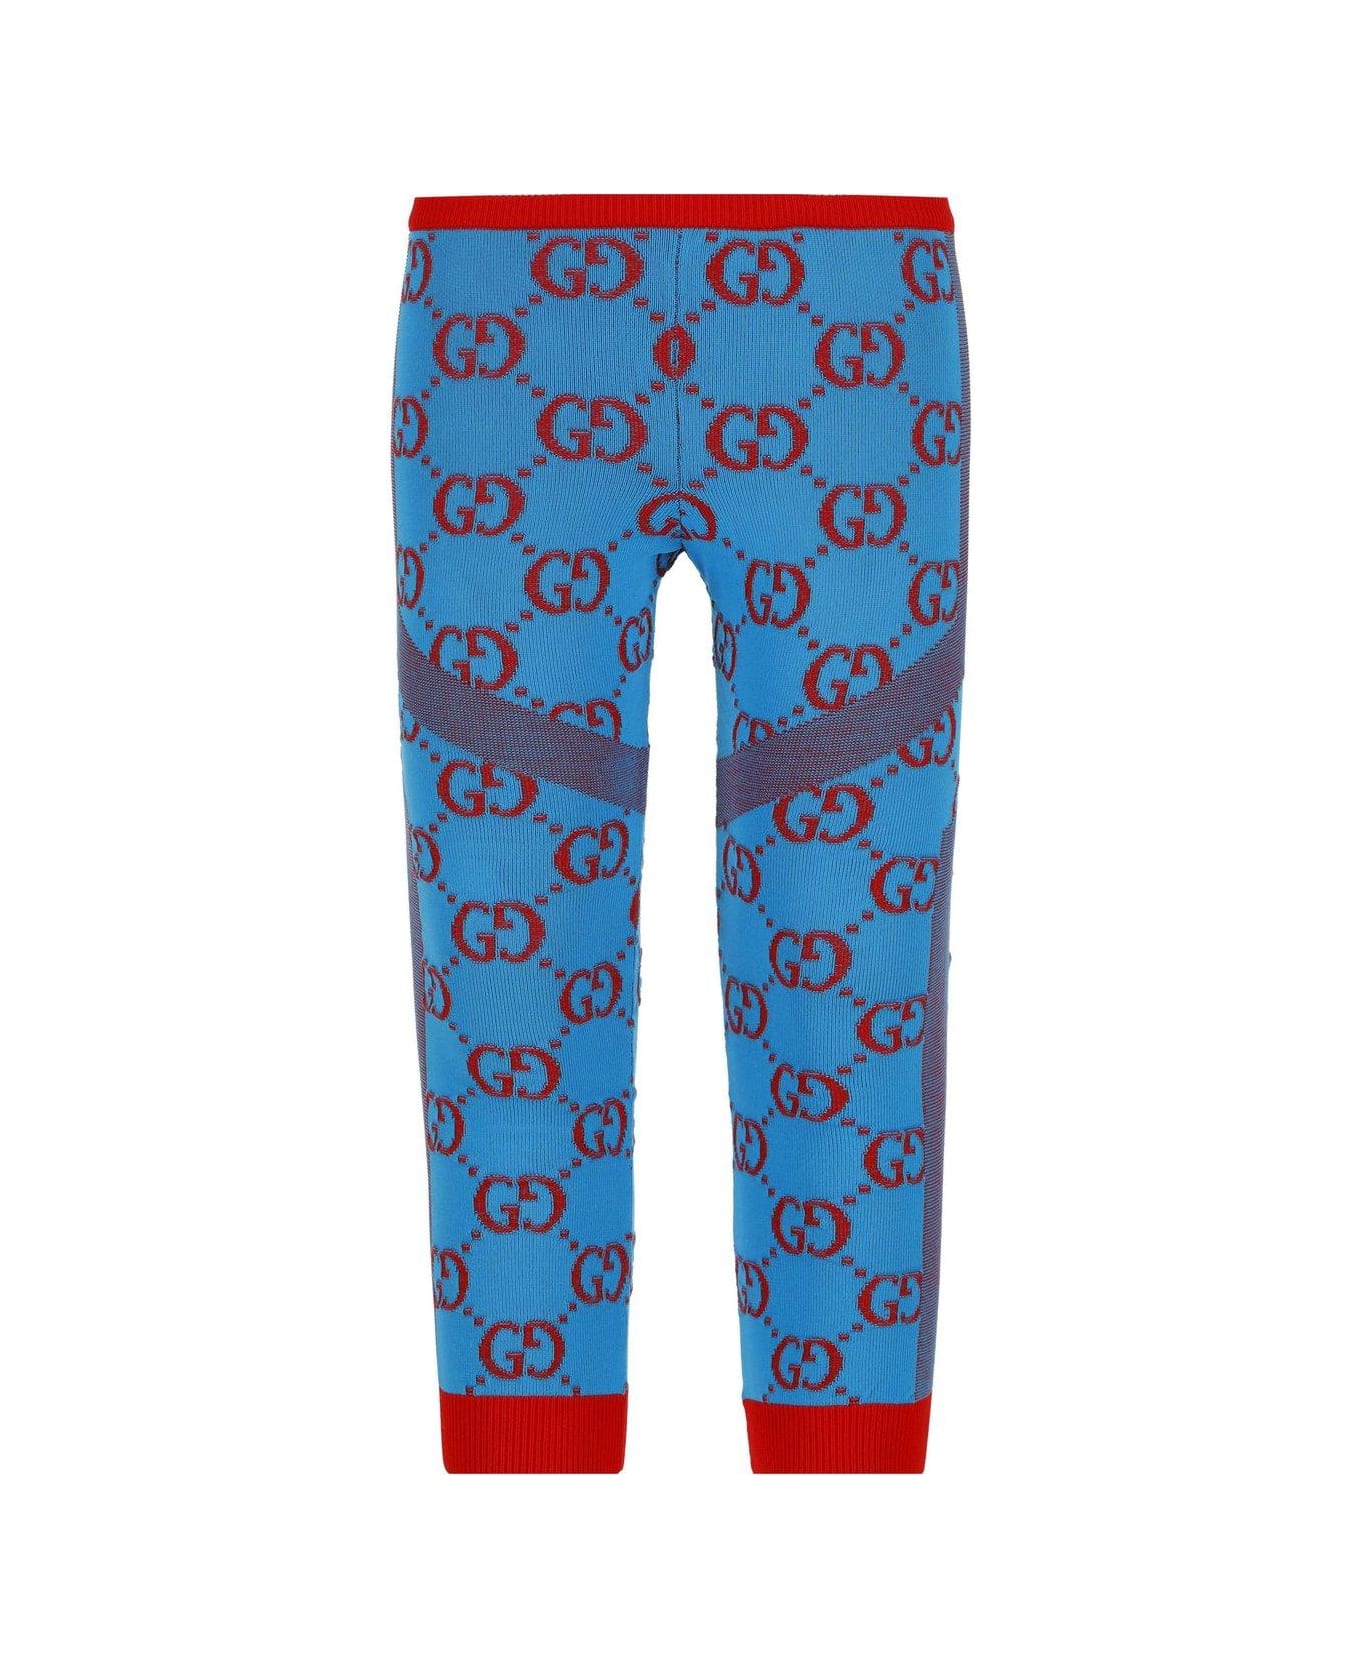 Gucci All-over Patterned Leggings